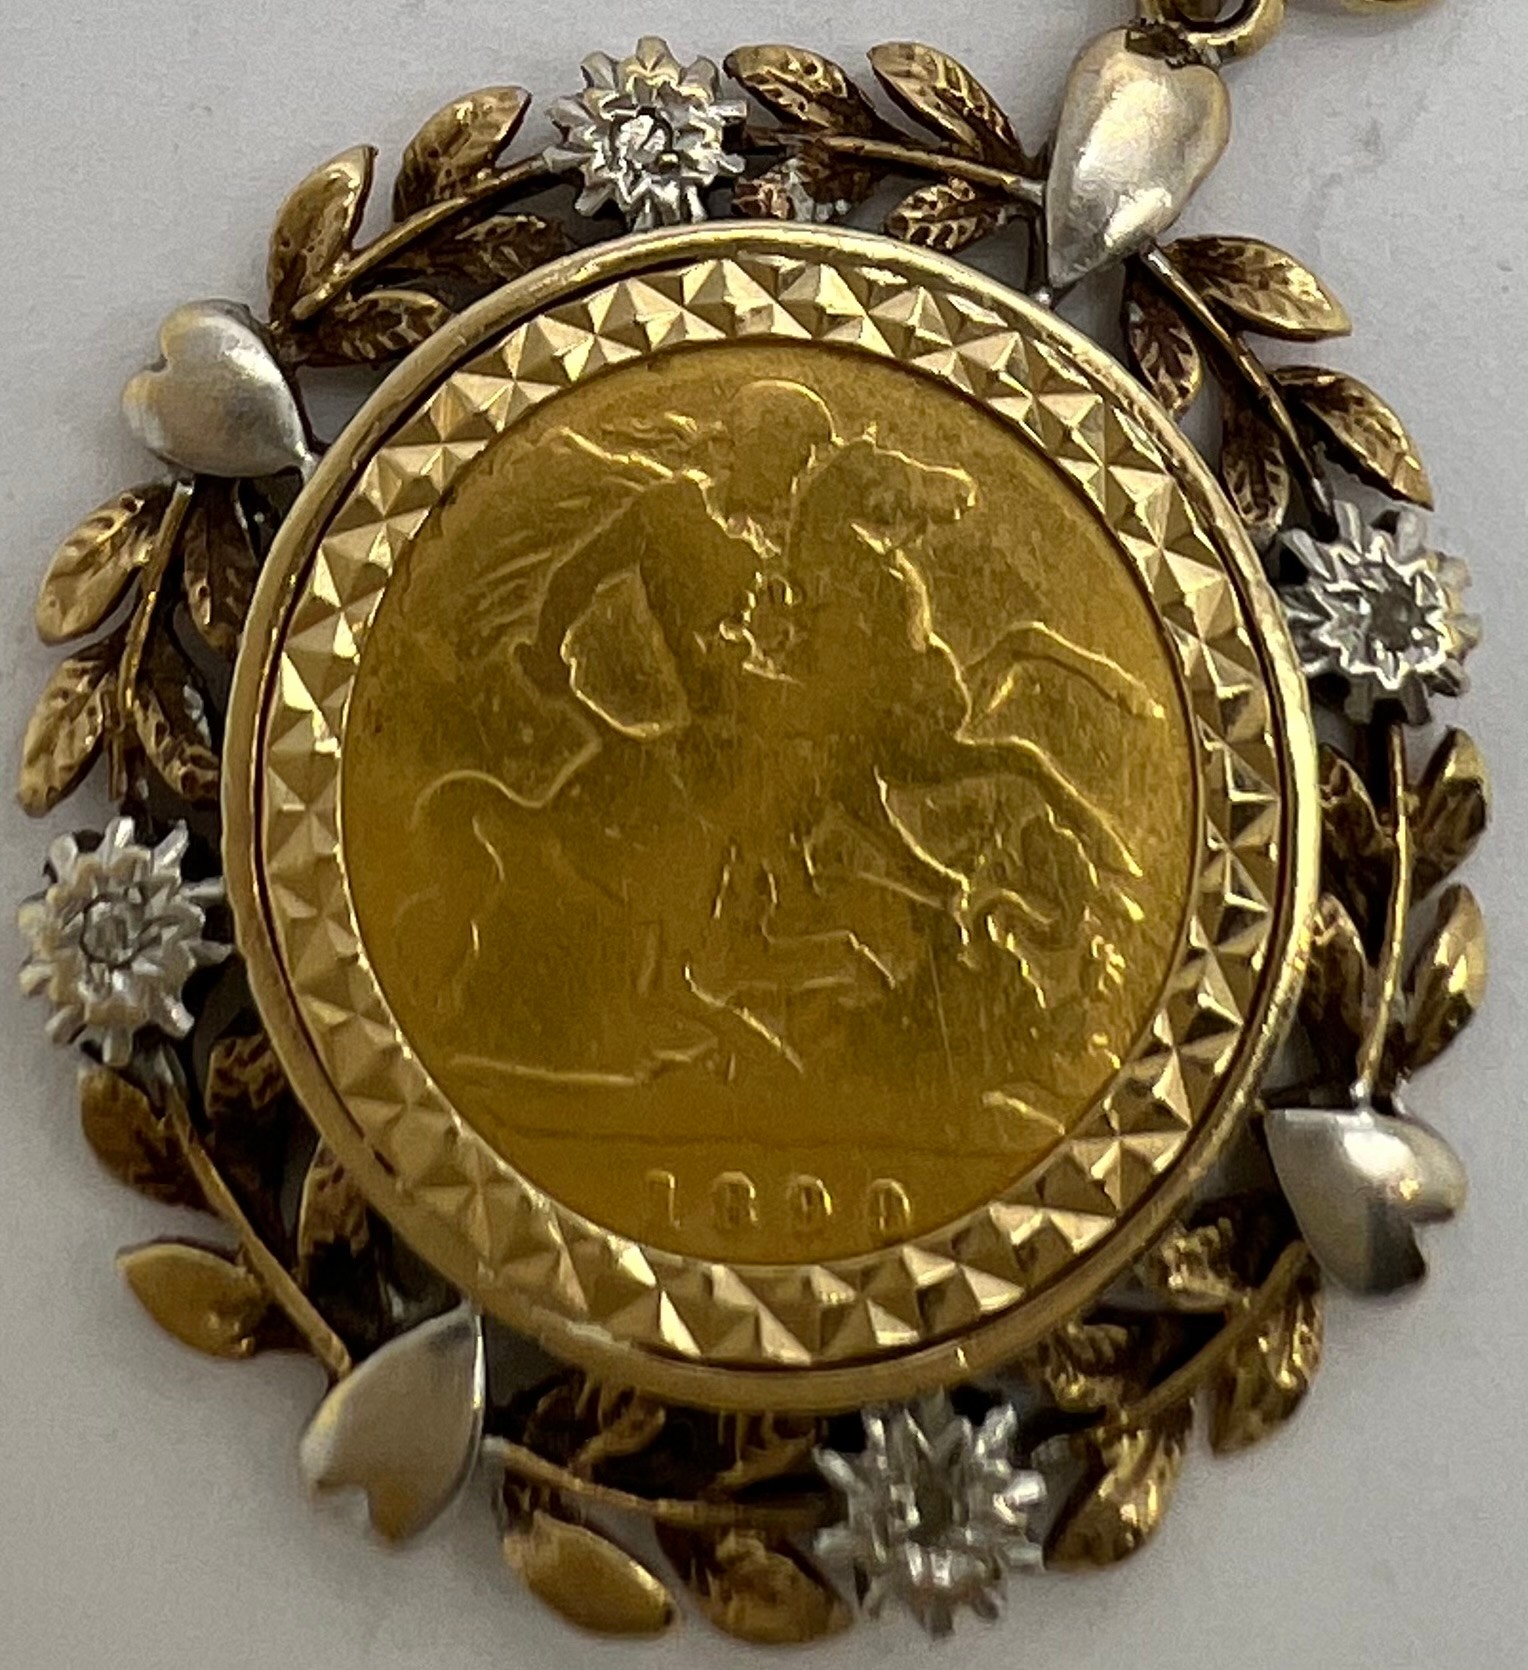 An 1899 half sovereign in a decorative 9ct gold mount. Total weight 8.2gm.